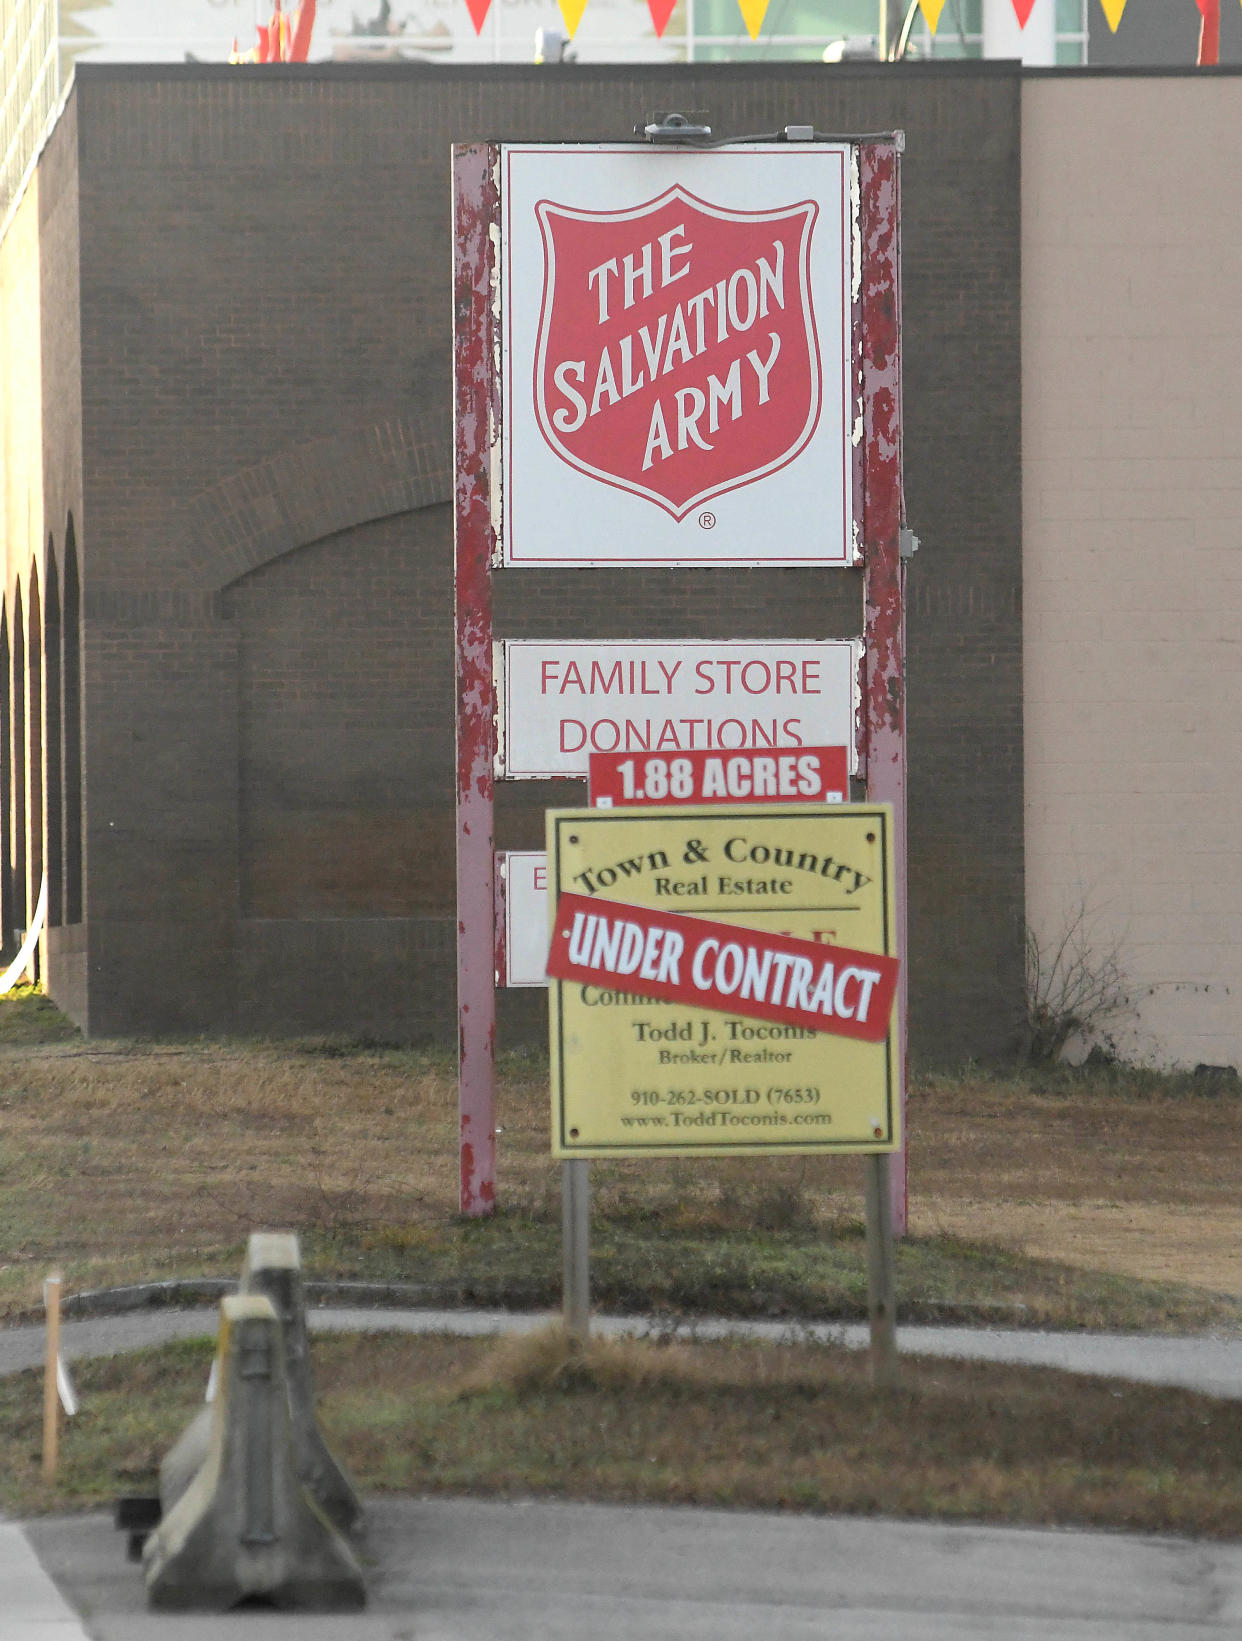 Wilmington leaders are looking to buy the Salvation Army building and site on the north side of downtown for $4.8 million. They say the purchase will aid "economic development" and allow the city to control more land as the area sees new development. KEN BLEVINS/STARNEWS